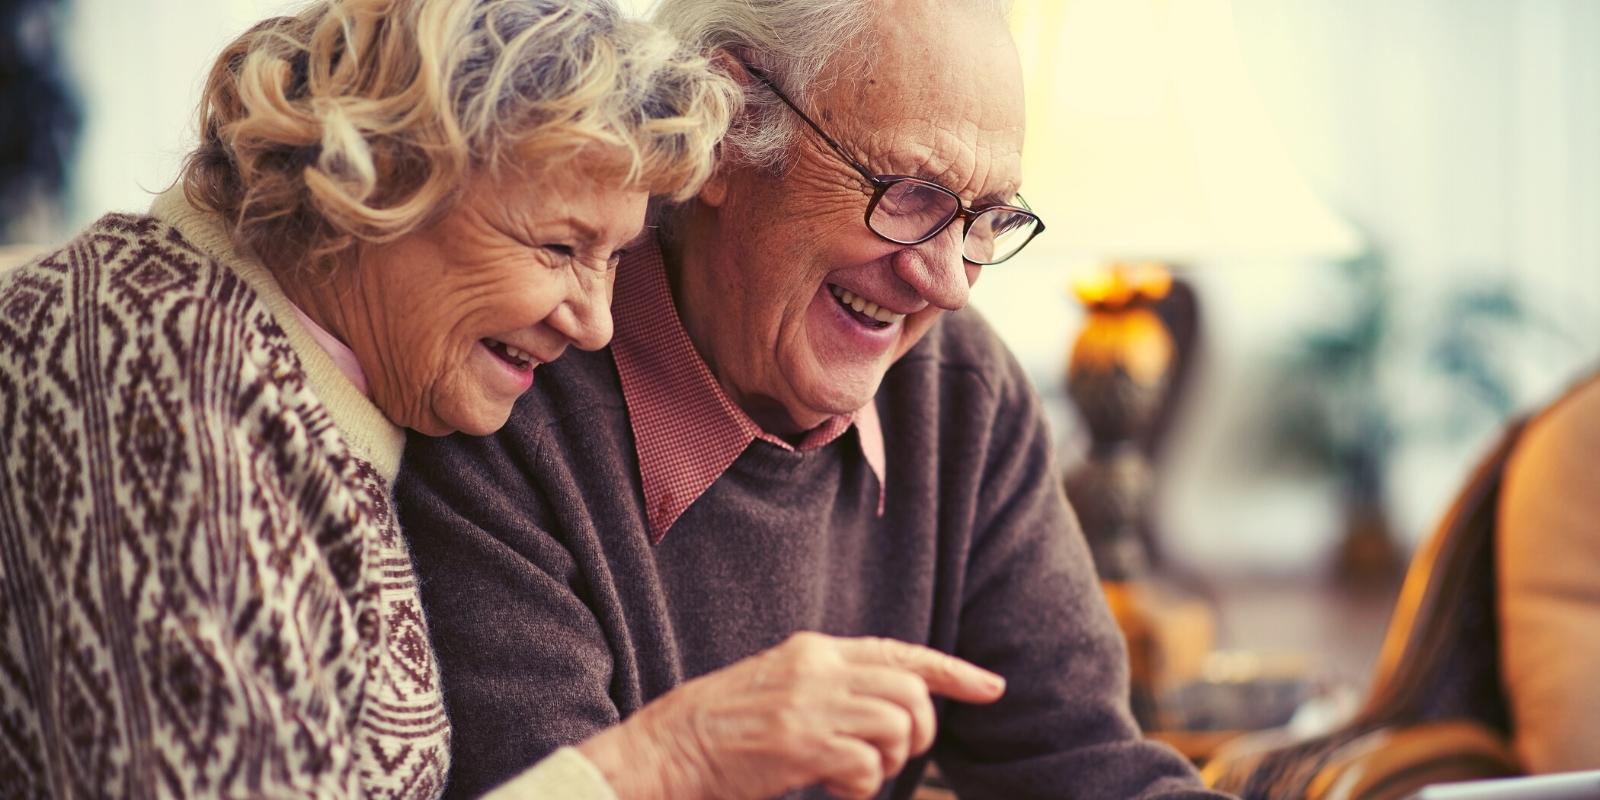 What are the benefits of companionship for seniors?